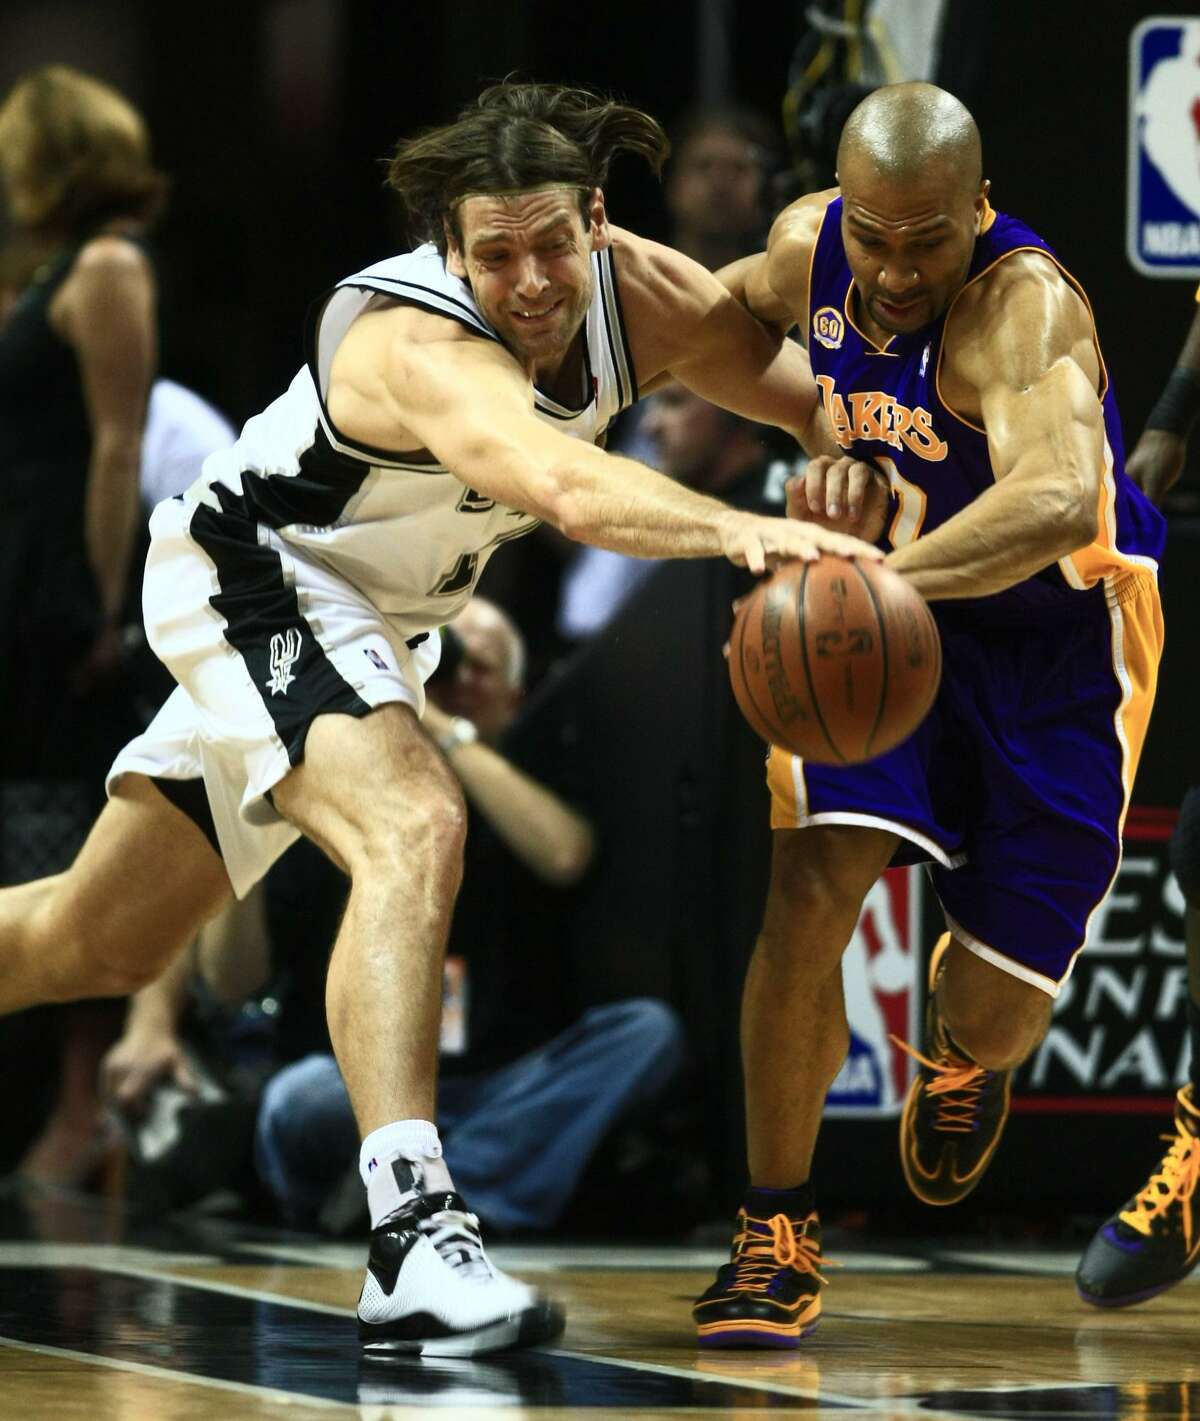 San Antonio Spurs center Fabricio Oberto (7) of Argentina, left and Los Angeles Lakers guard Derek Fisher (2) battle for the loose ball during first half action in game three of the NBA Western Conference Finals Tuesday May 27, 2008. WILLIAM LUTHER